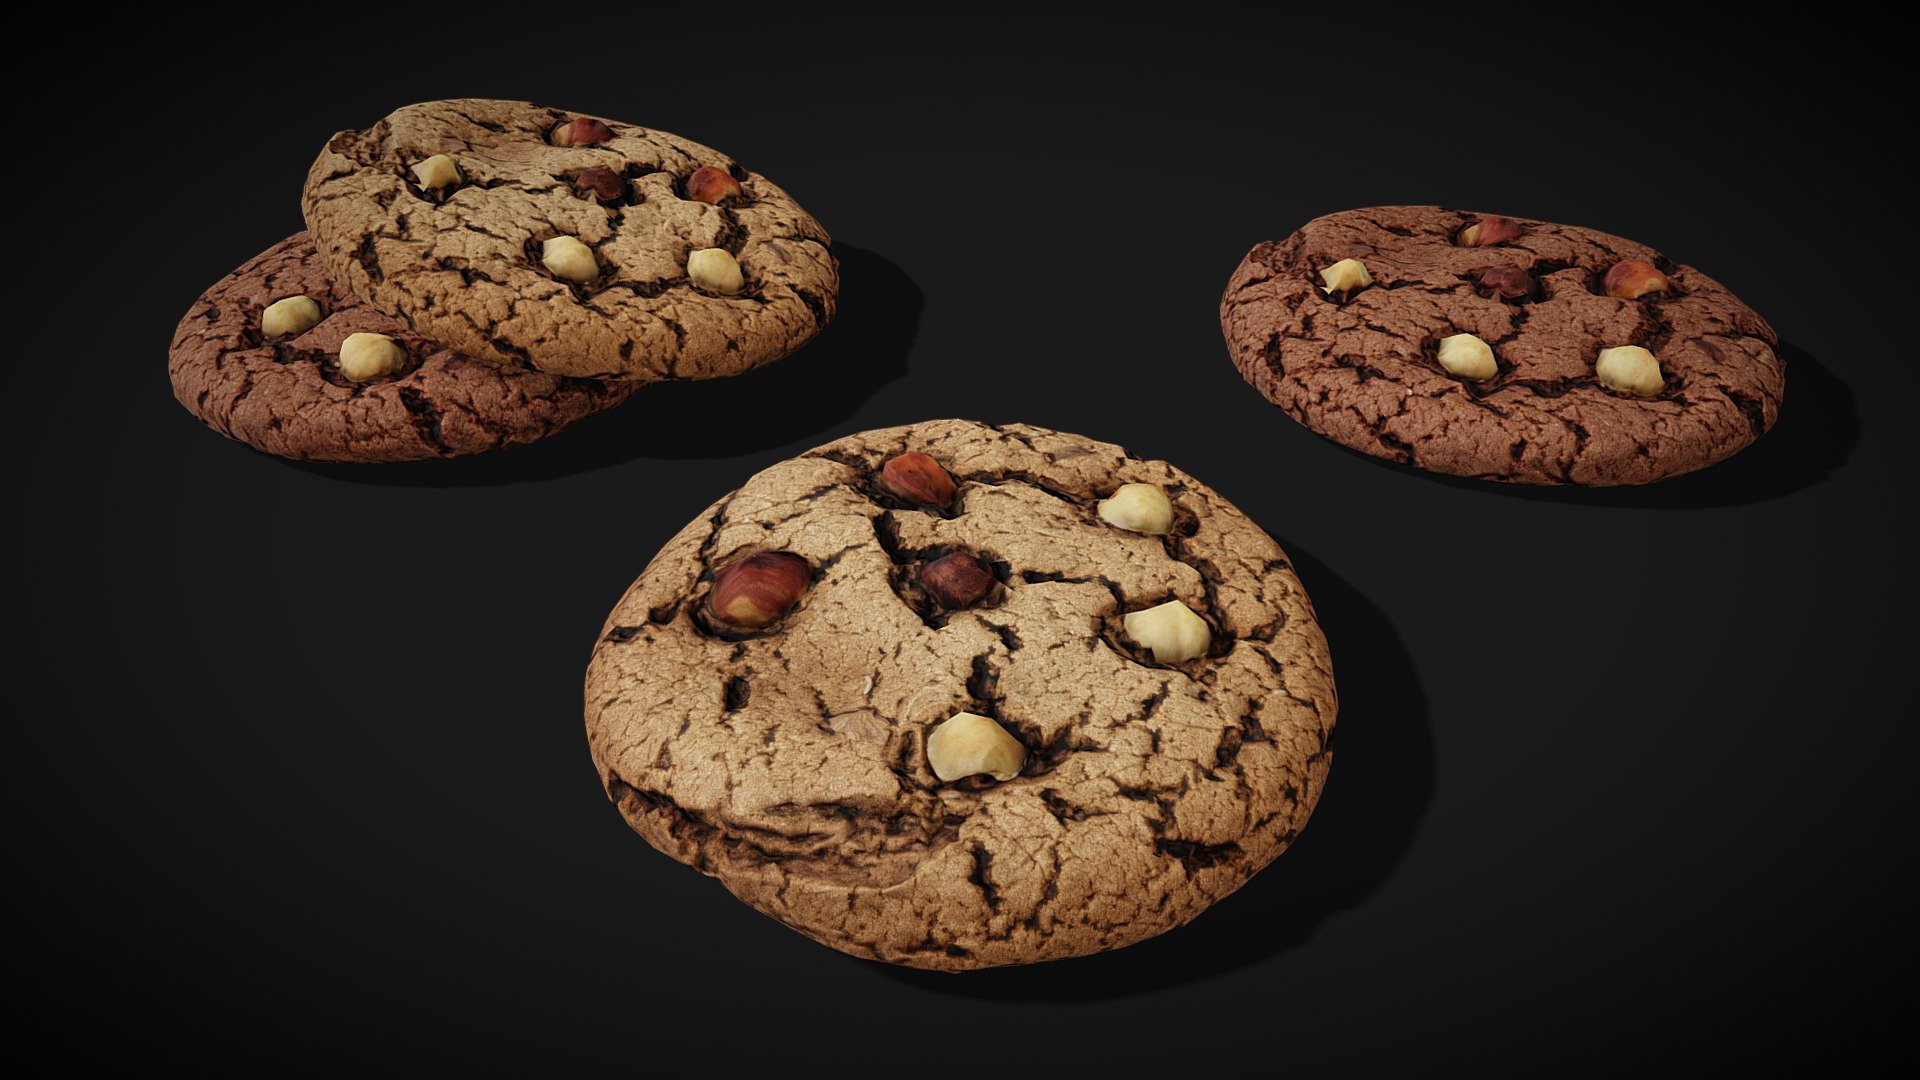 Scanned Low Poly Cookie: 2852 tris

Texture versions: 2

Types of textures: Base Color, Roughness, Normal, Ambient Occlusion

Quality: 4096x4096

Format: PNG - Scanned Low Poly | Cookies - Download Free 3D model by Den1121 3d model